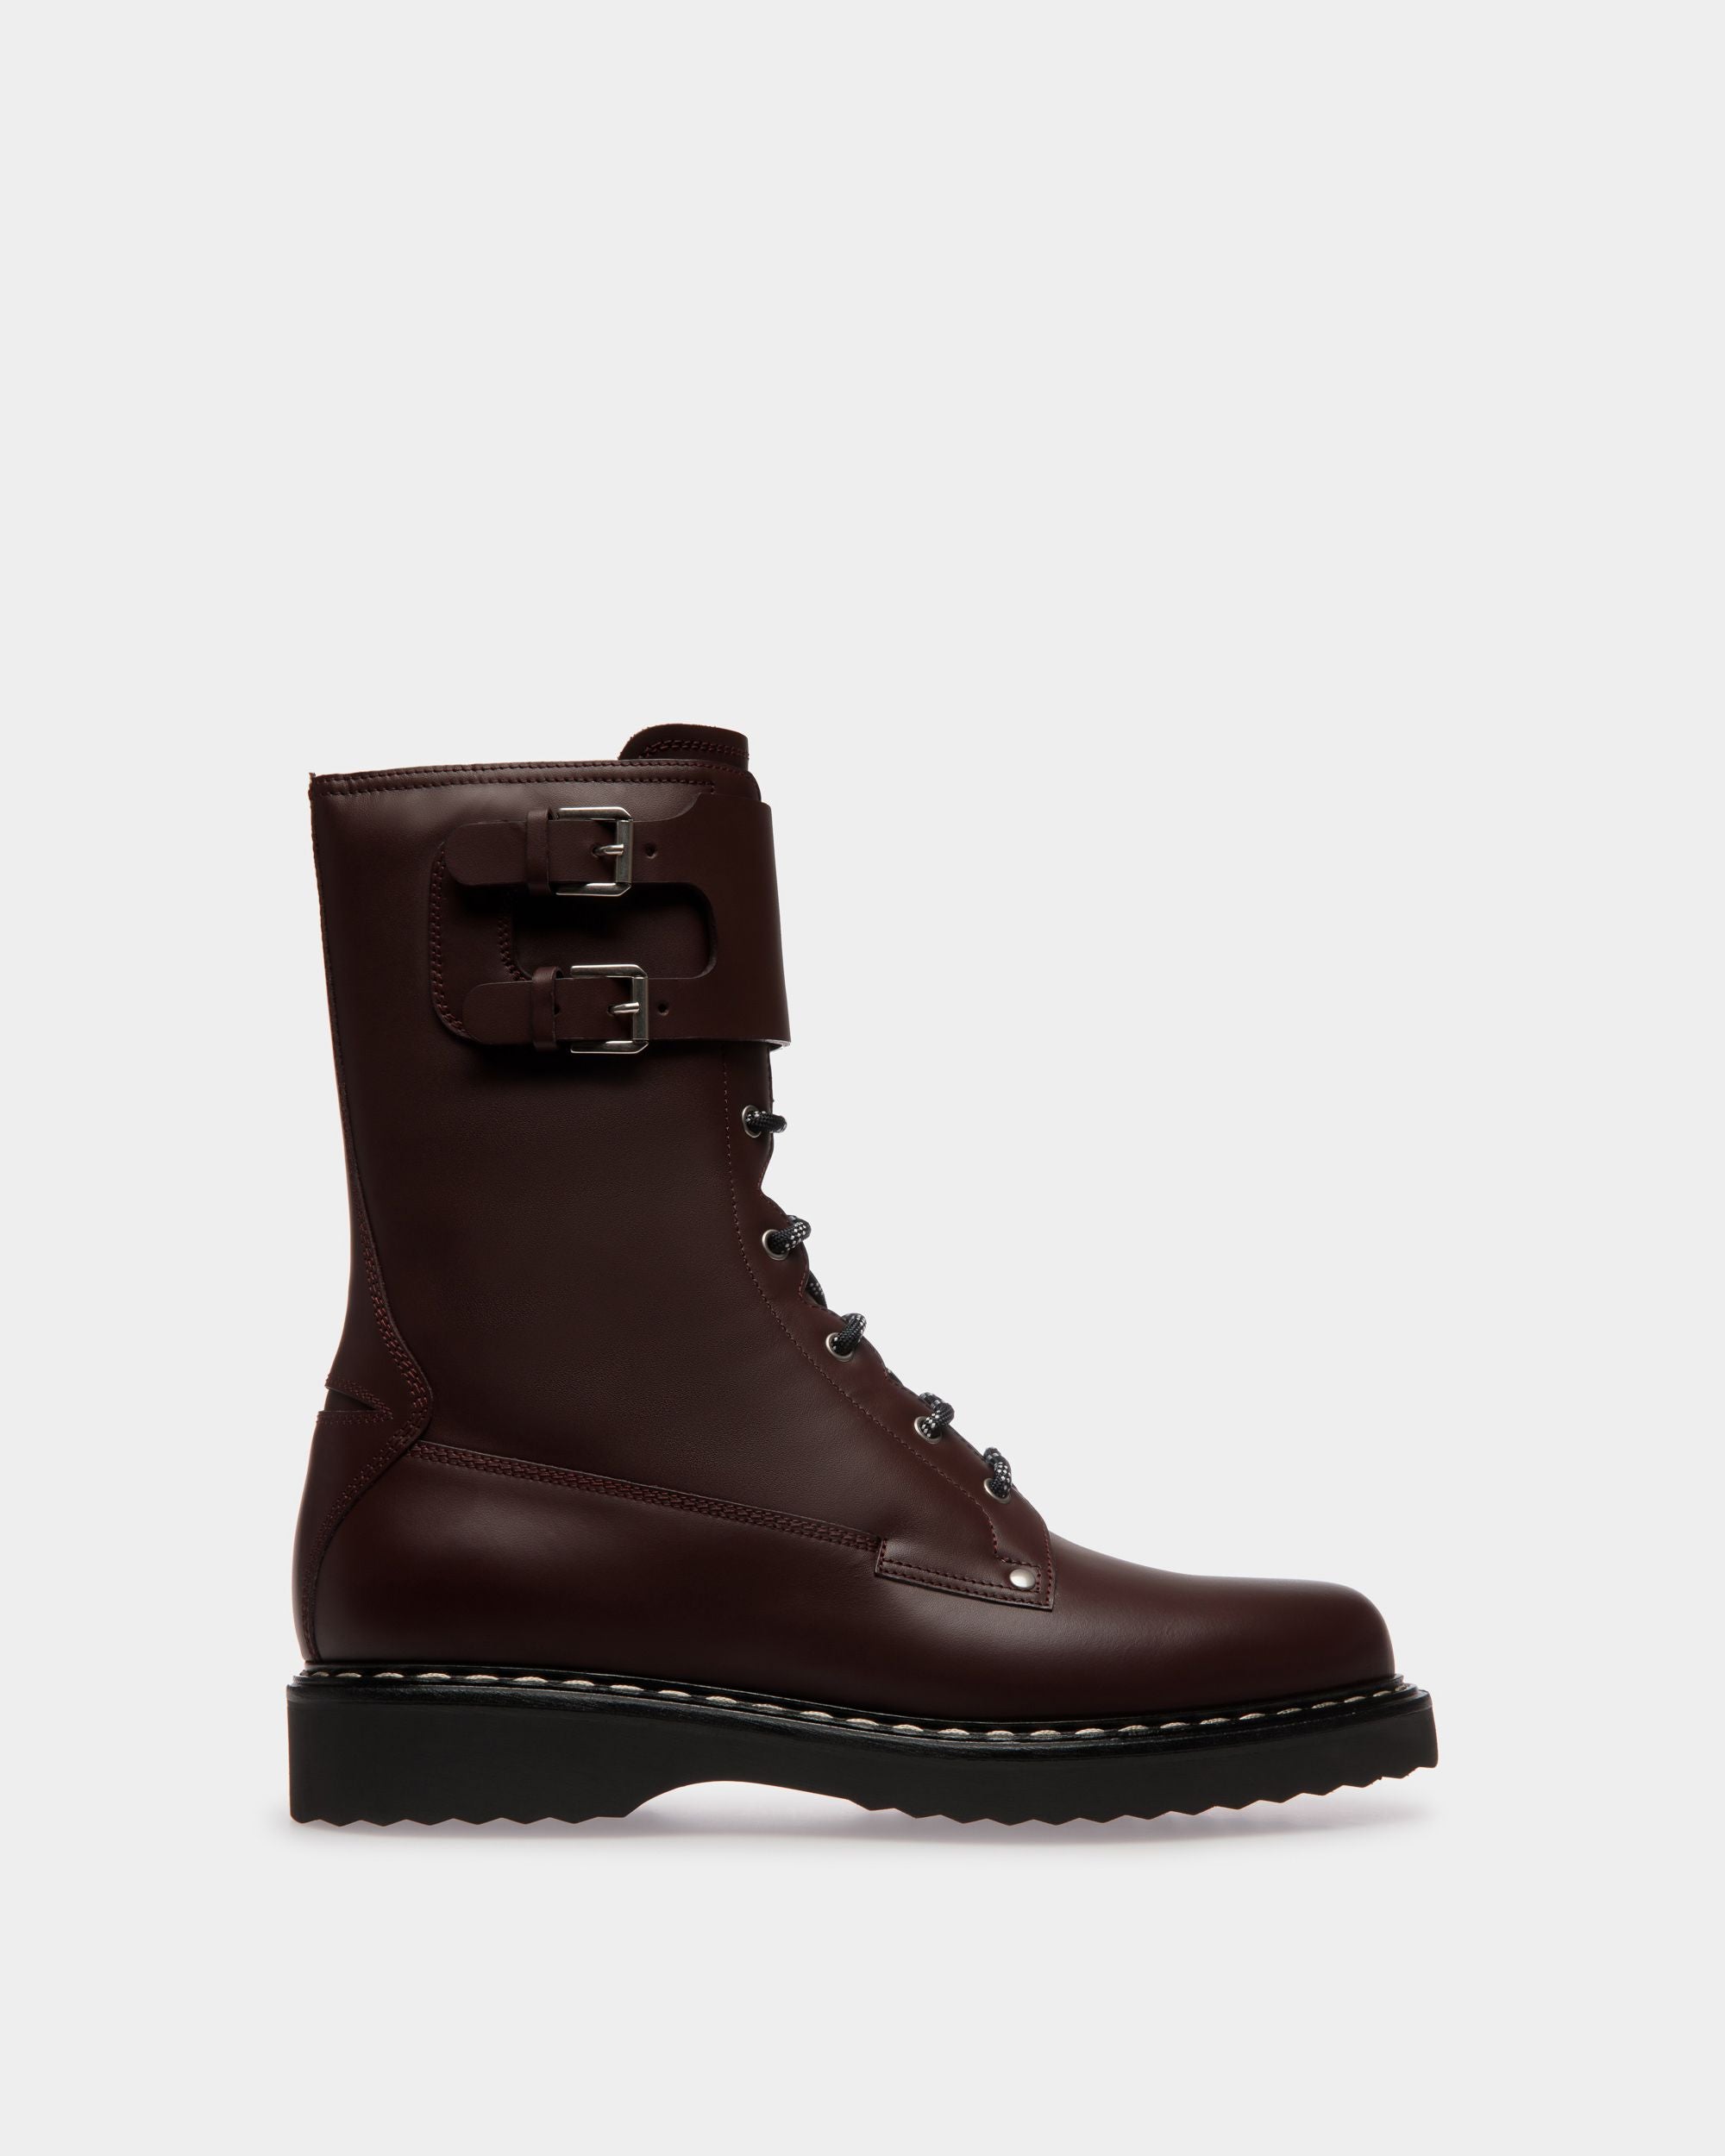 Neasden | Men's Lace-Up Boot in Burgundy Leather | Bally | Still Life Side